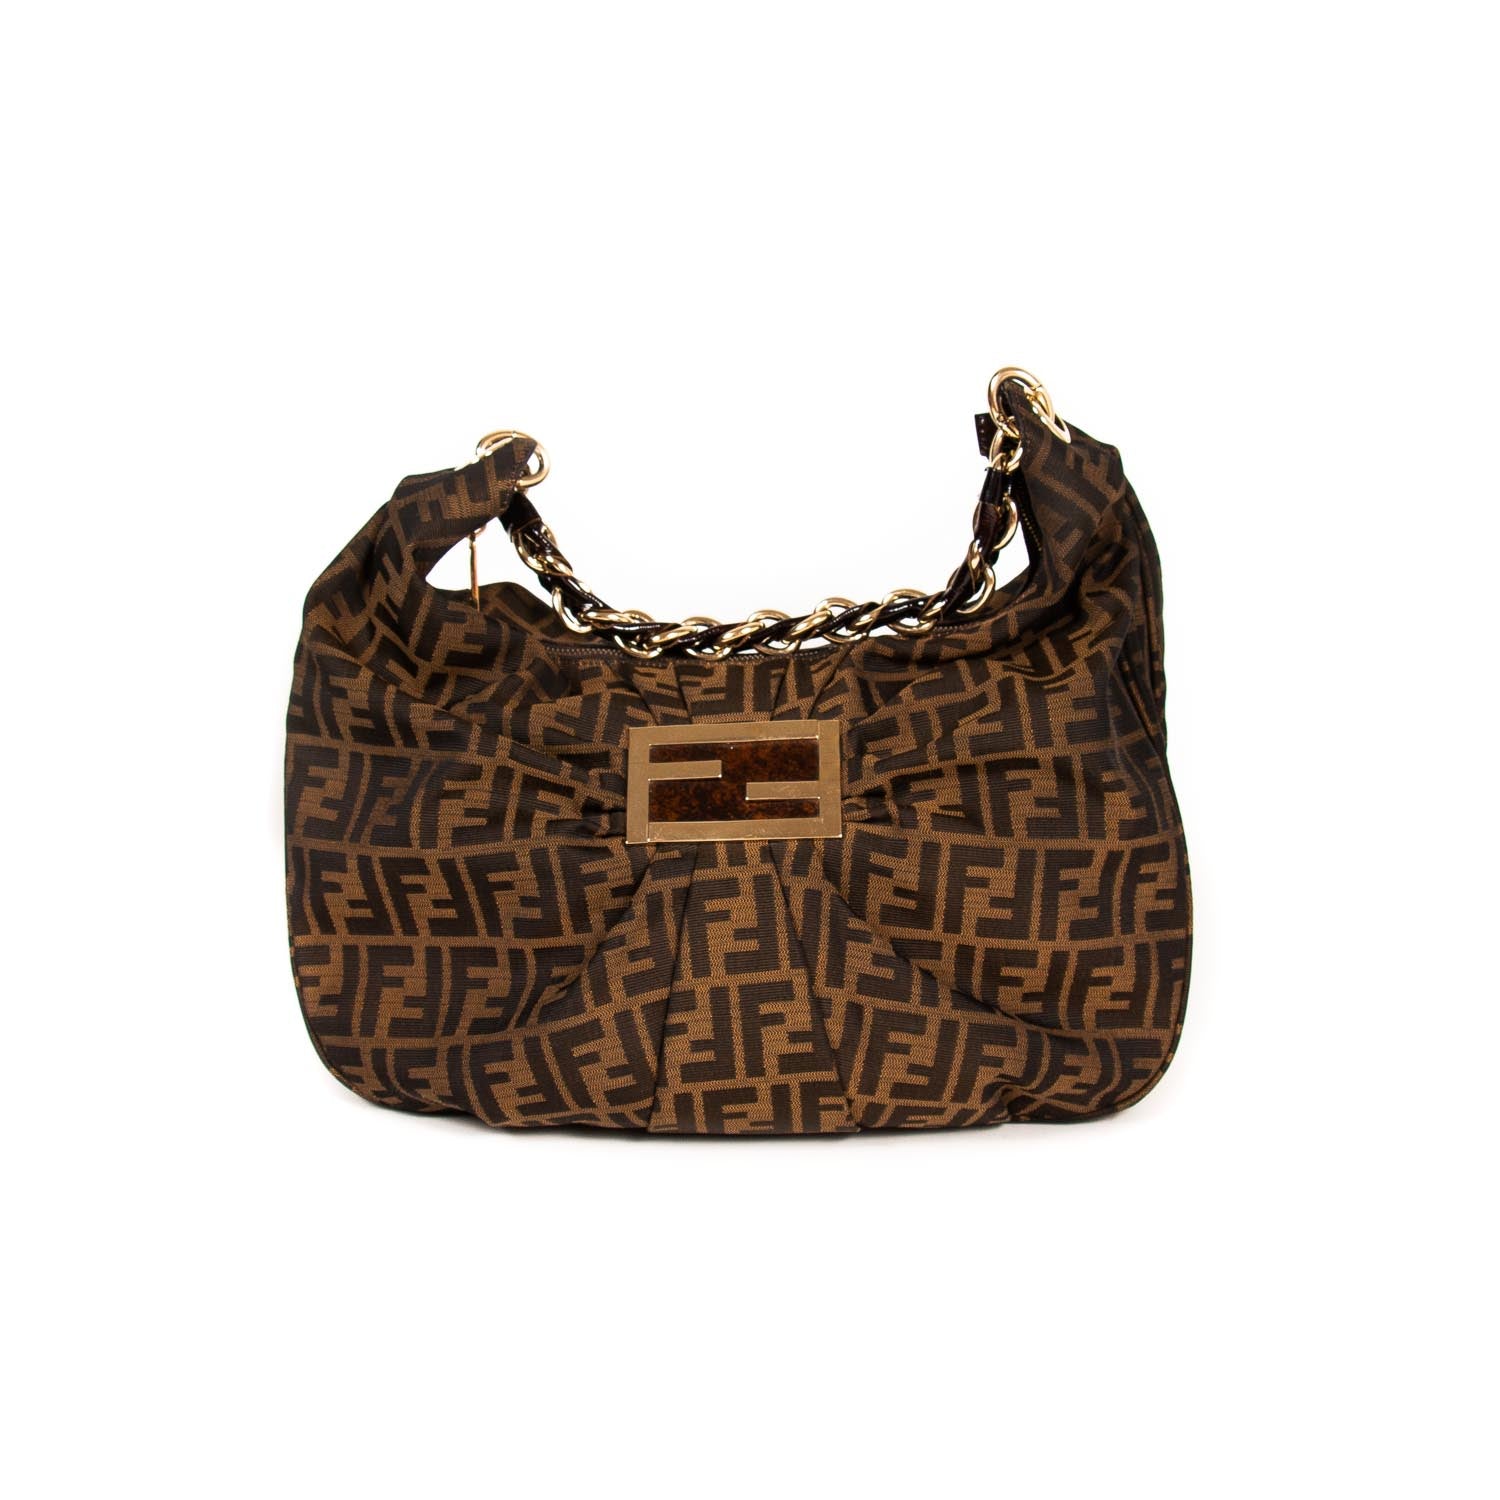 Shop Authentic Fendi Zucca Mia Hobo Bag At Revogue For Just Usd 600.00